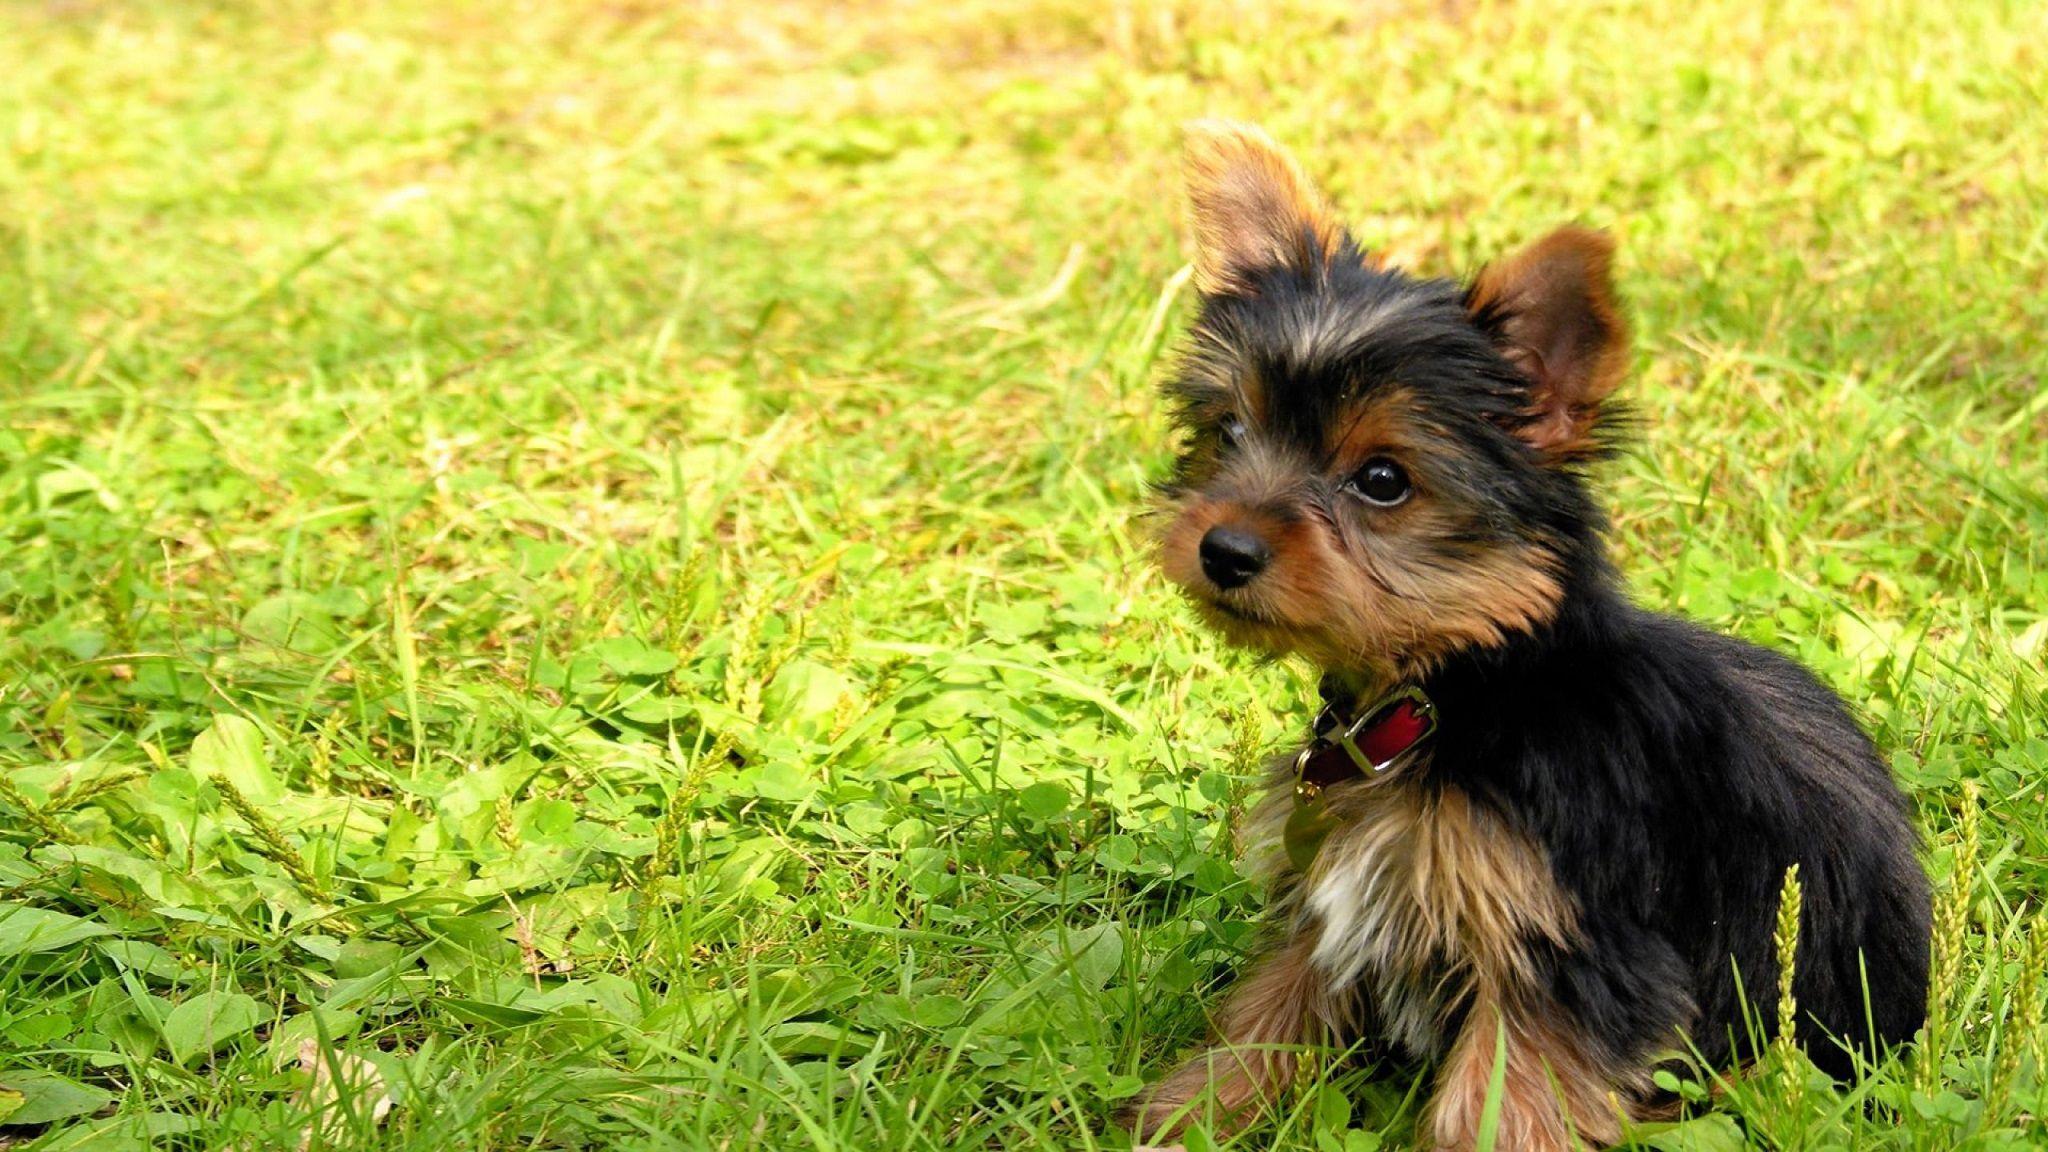 The breed is nicknamed Yorkie HD Wallpaper. Background Image